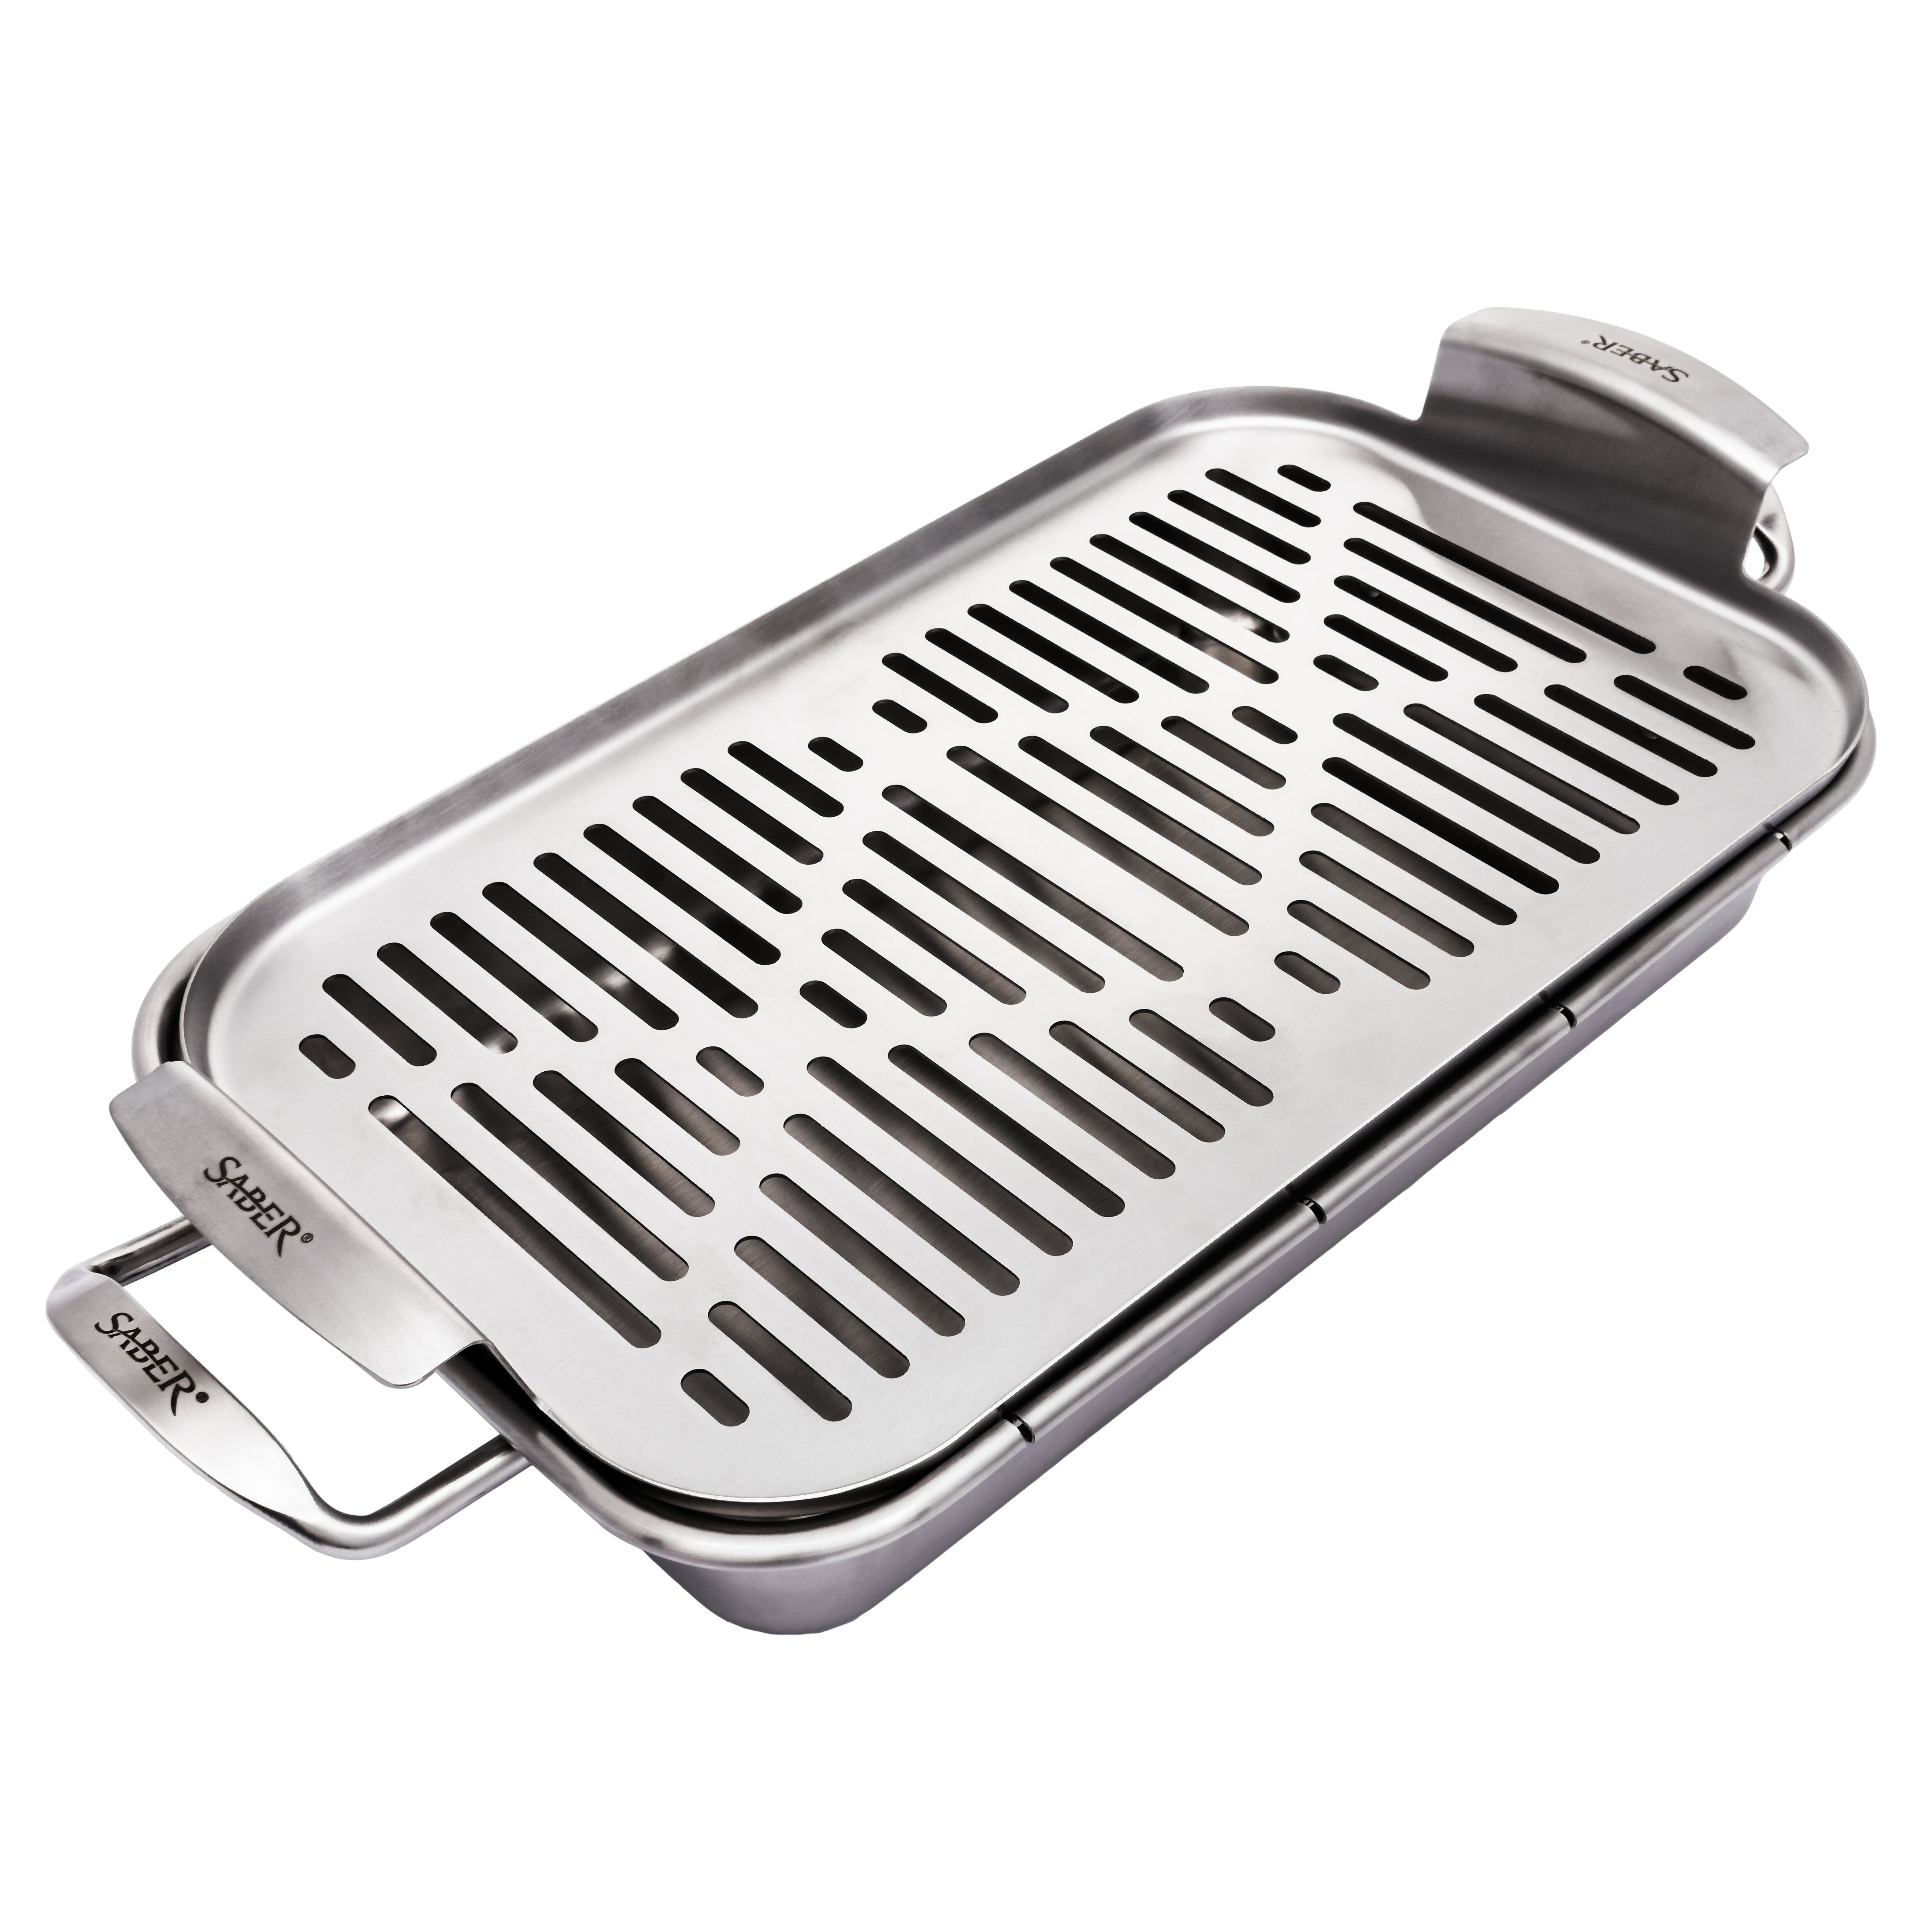 SABERGrills SABER Grill Accessory Steamer Tray, Stainless Steel Wayfair